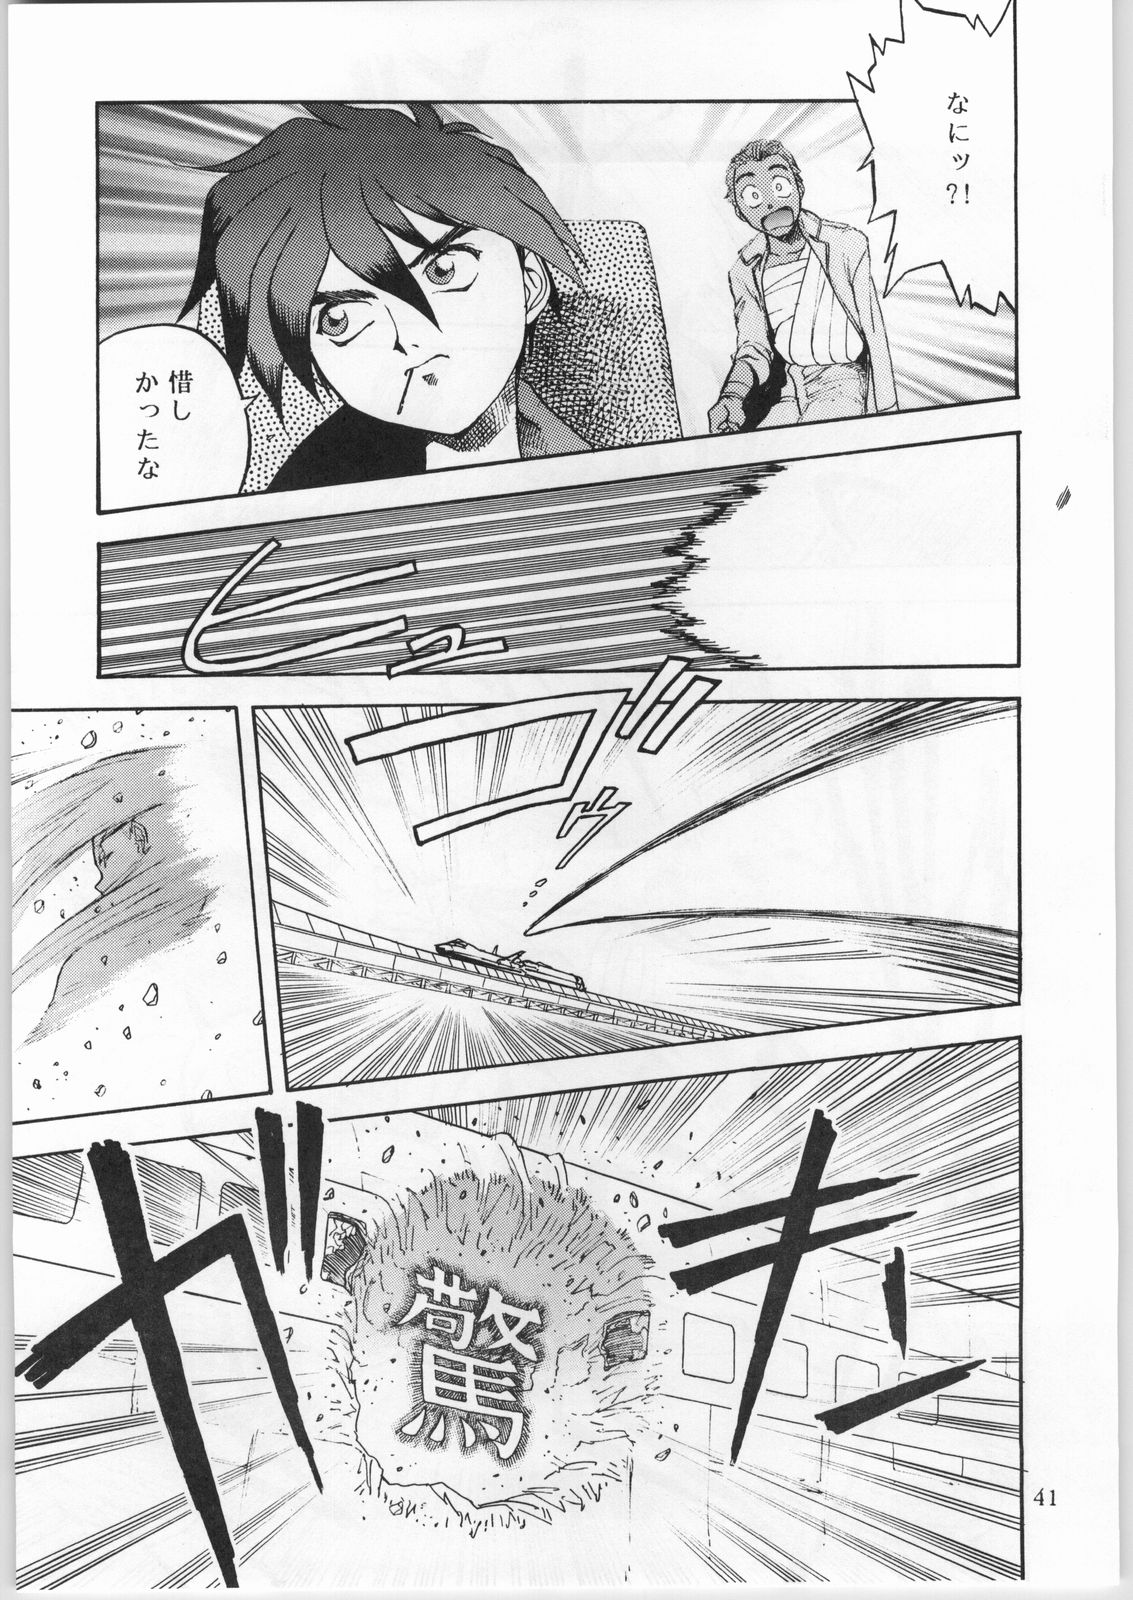 [CABLE HOGUE UNIT (Various)] Crossing the Line Round Three (Gundam) page 42 full